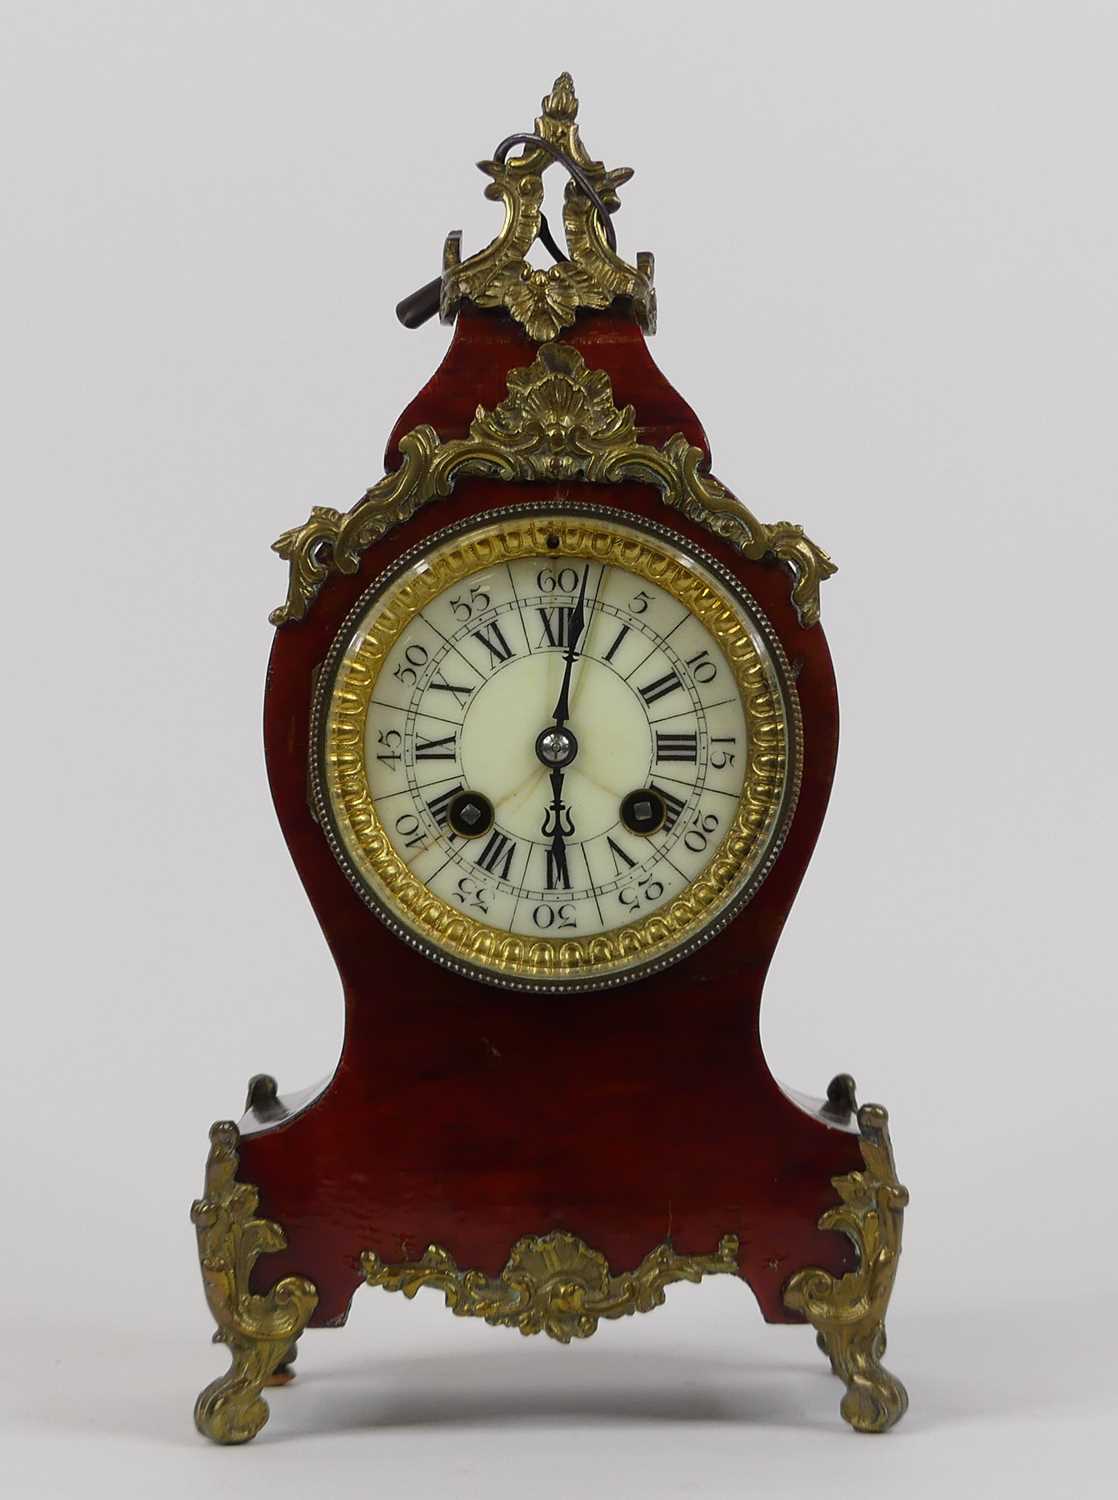 An early 20th century mantel clock, in the Rococo taste, the enamel dial showing Roman numerals,